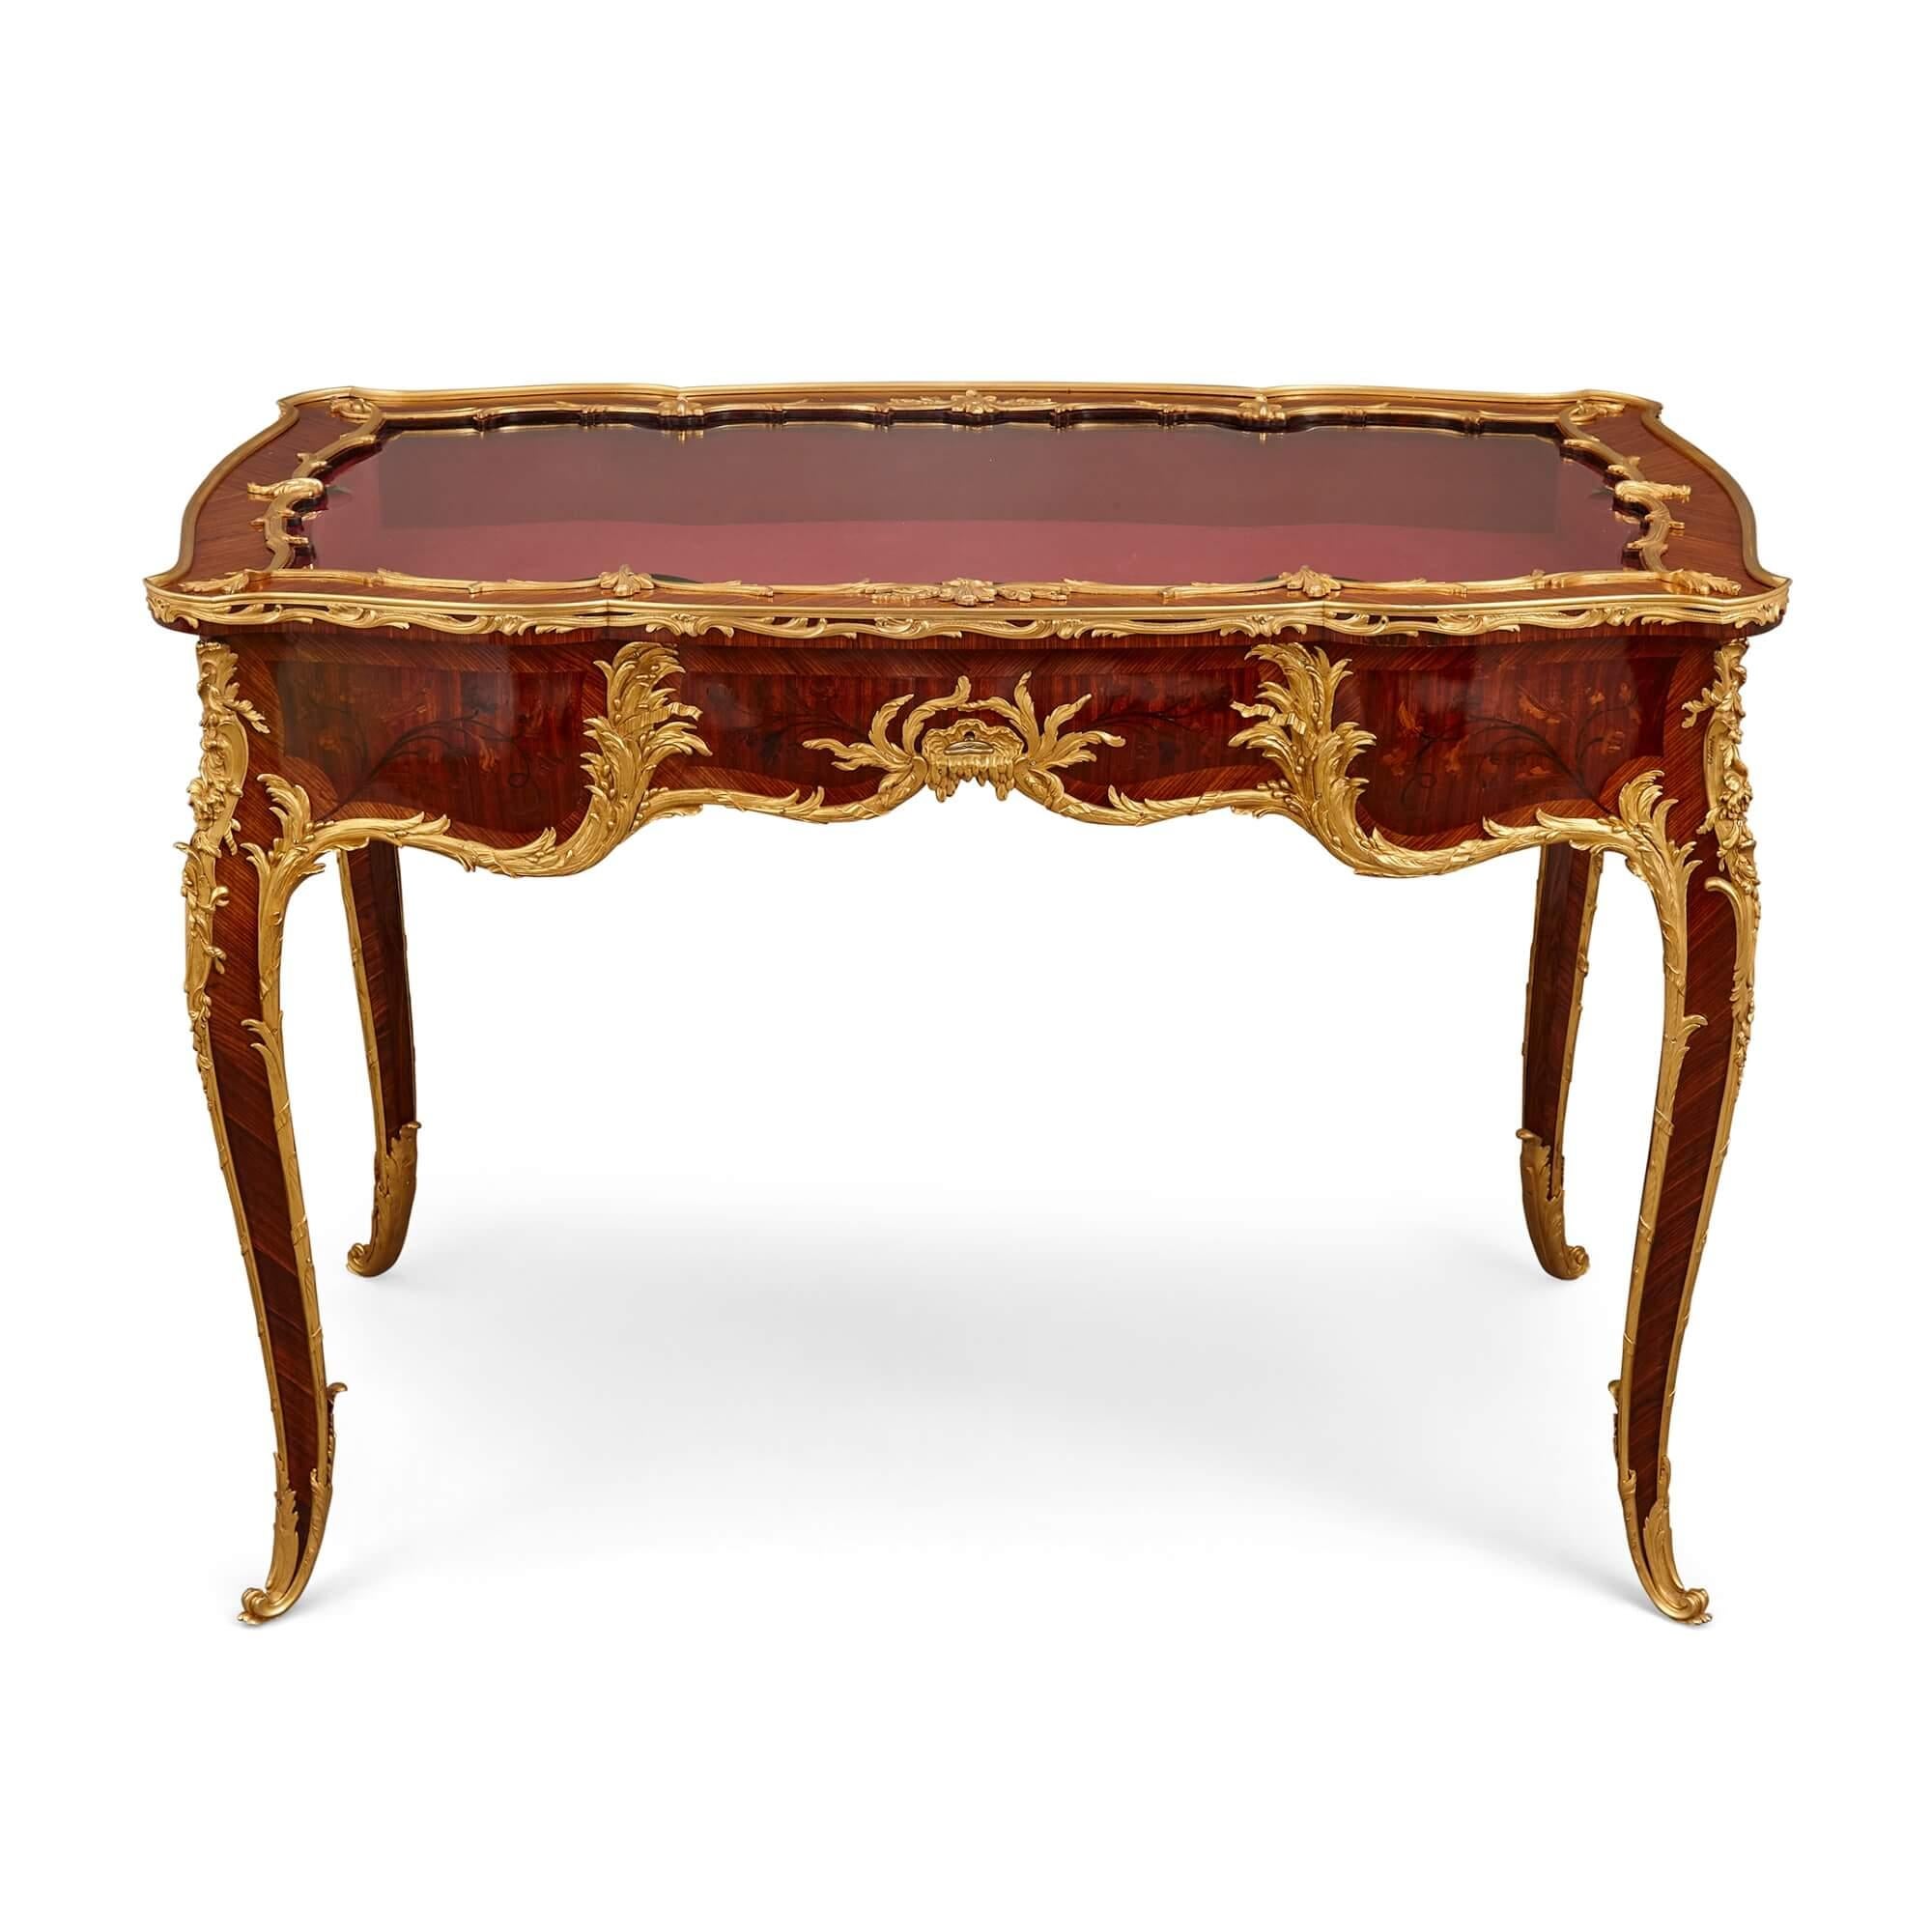 A large Louis XV style ormolu mounted marquetry table vitrine by Linke
French, Late 19th Century
Height 76cm, width 108cm, depth 67cm

In the Louis XV style, with floral marquetry design and hinged glass top, this excellent piece is a large ormolu